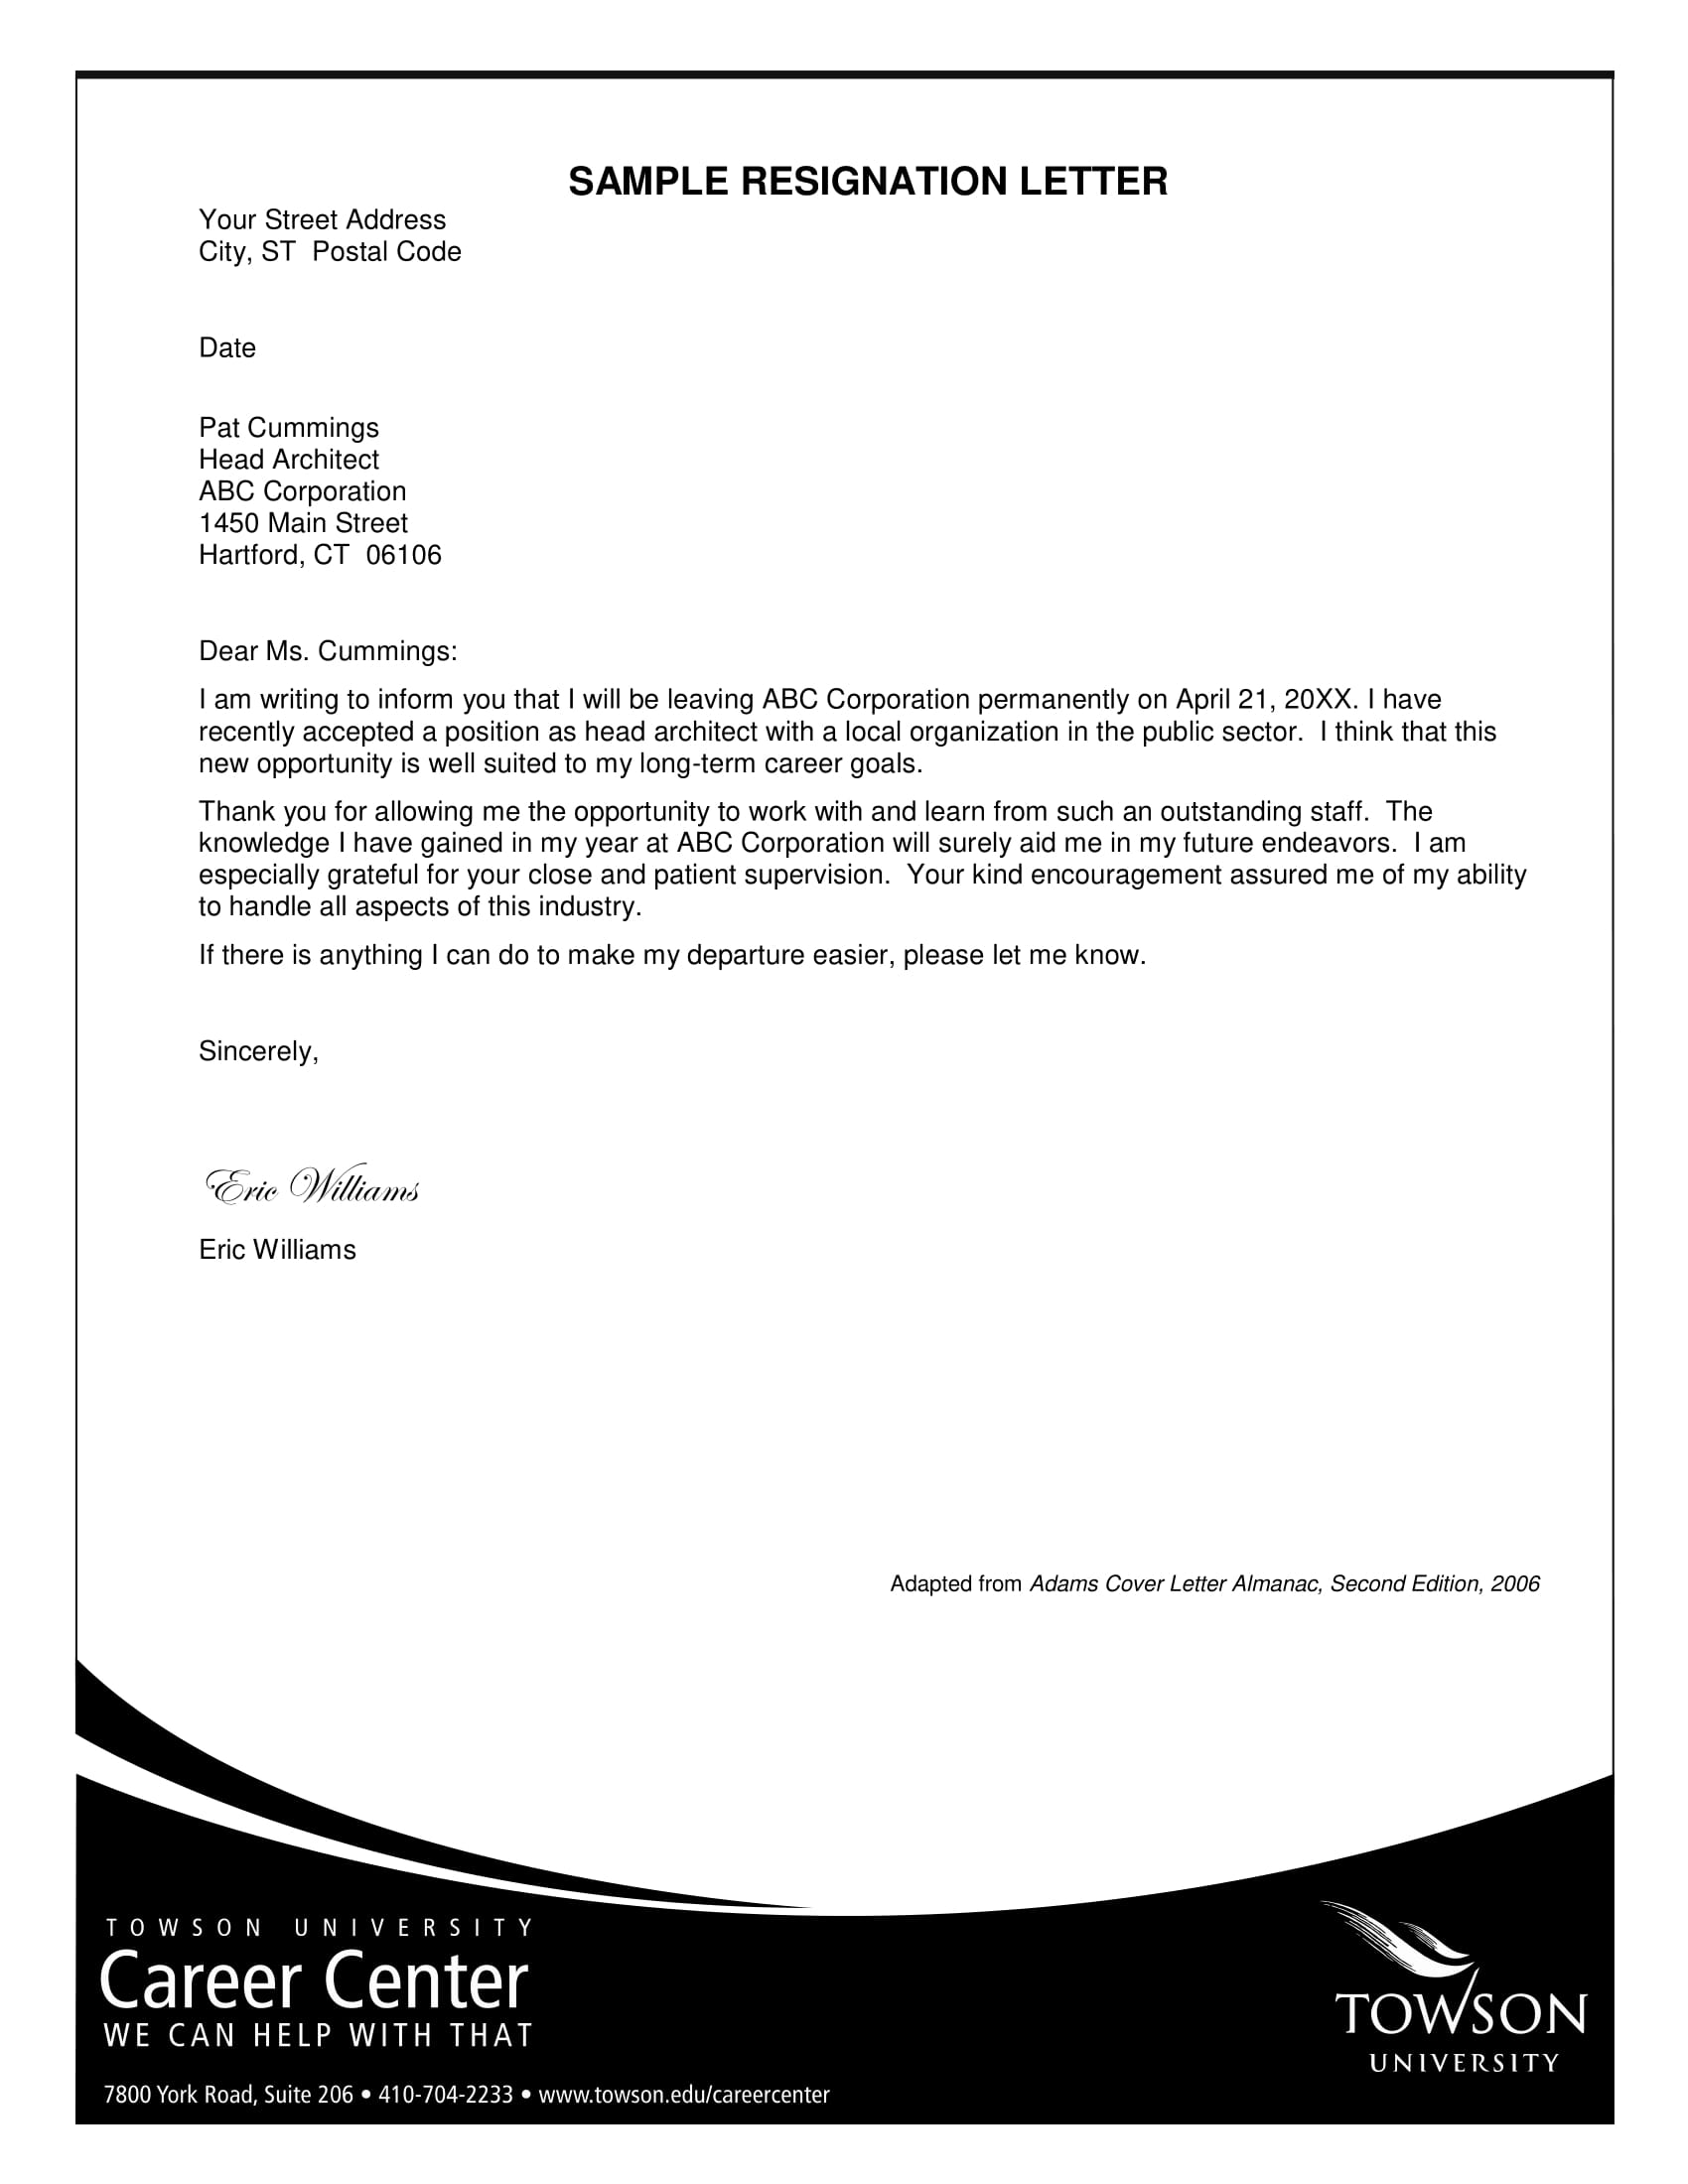 35+ Simple Resignation Letter Examples - PDF, Word | Examples